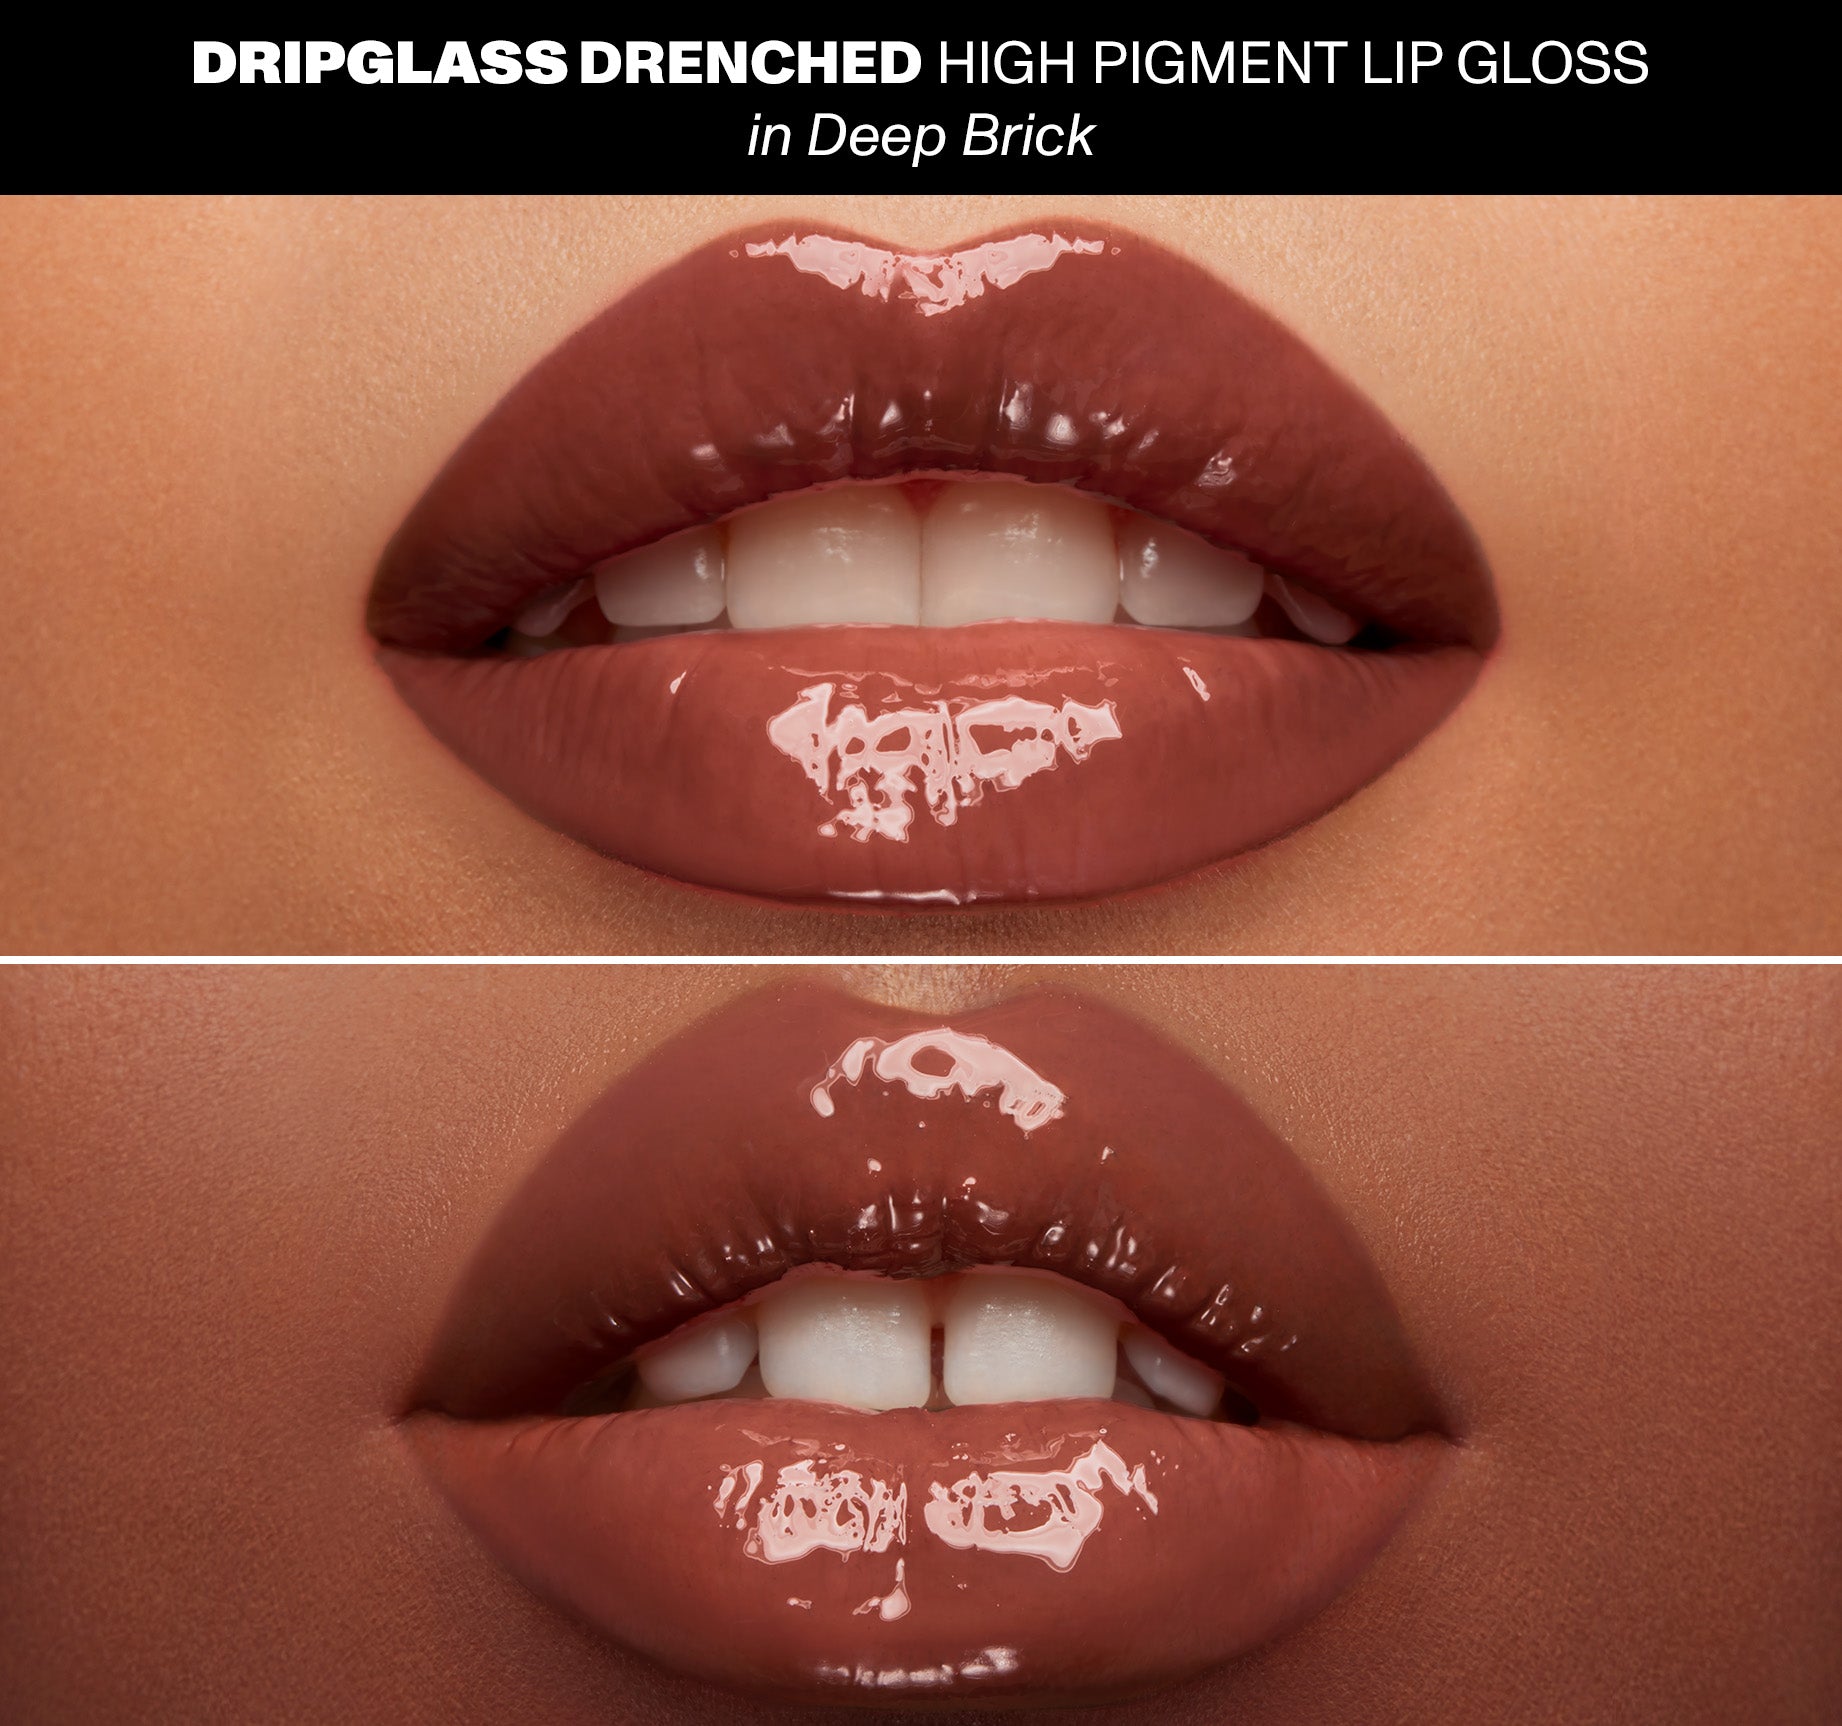 Dripglass Drenched High Pigment Lip Gloss - Deep Brick - Image 3